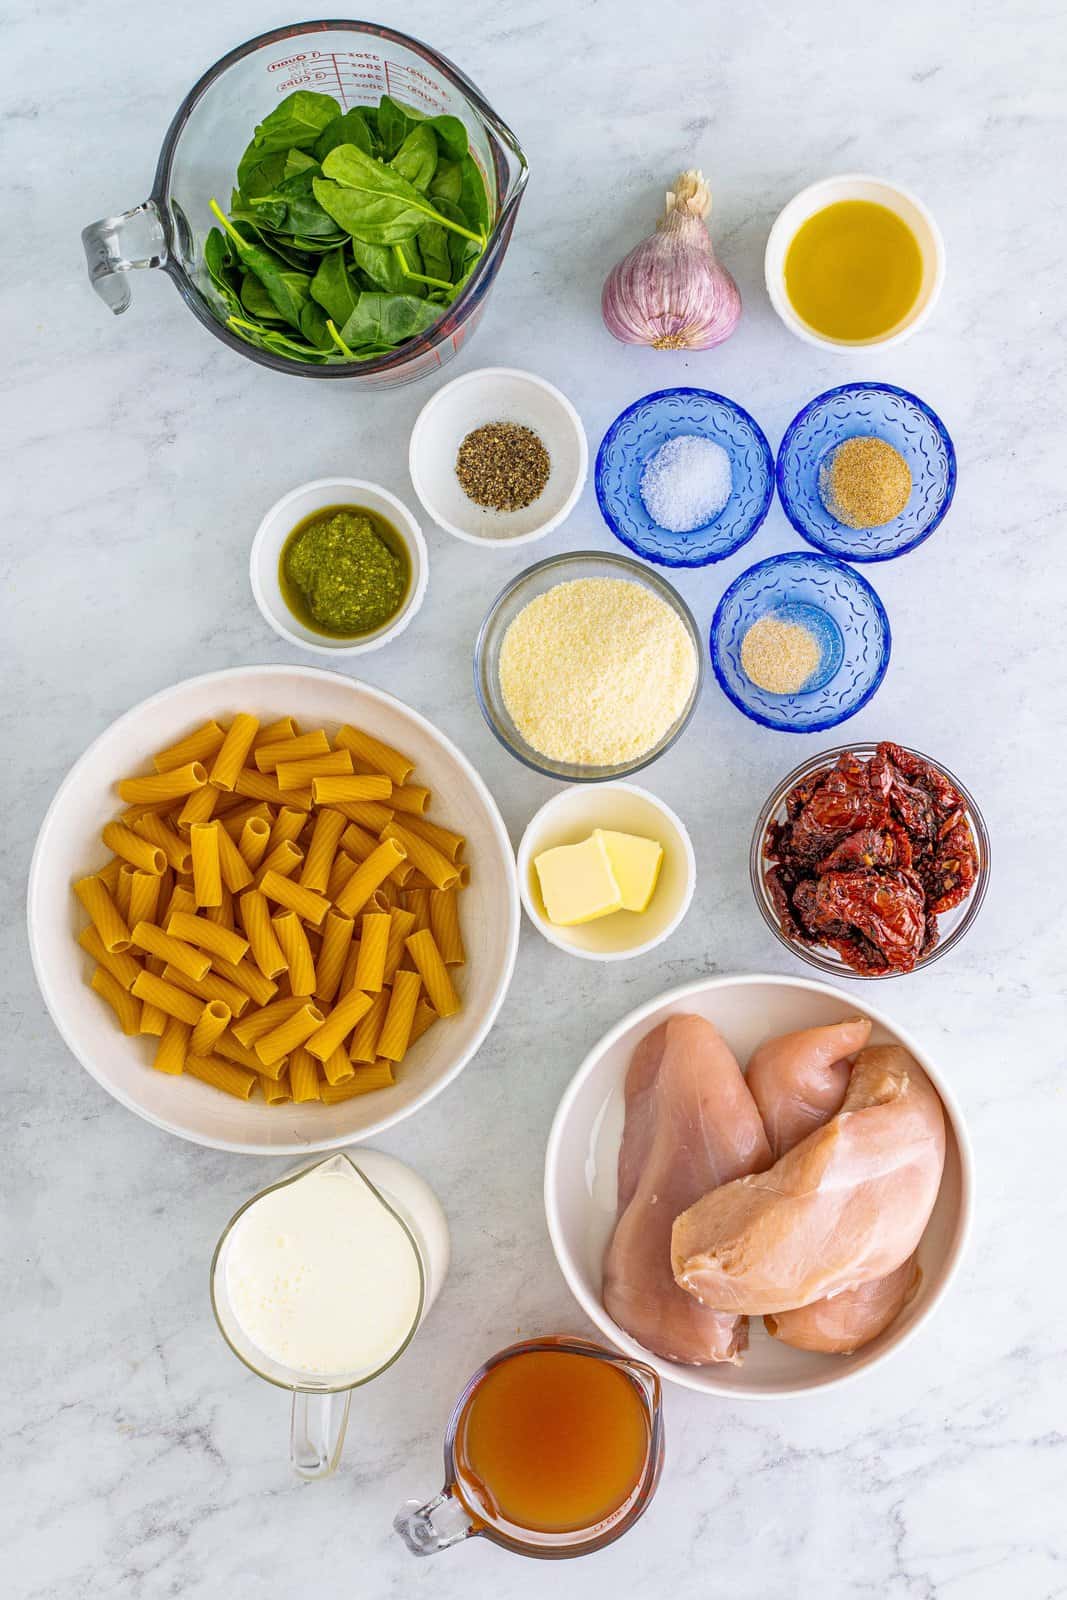 Ingredients needed: boneless skinless chicken breasts, kosher salt, pepper, garlic powder, onion powder, olive oil, salted butter, canned sun-dried tomatoes, garlic, prepared pesto, unsalted chicken stock, heavy cream, baby spinach, parmesan cheese and rigatoni or other short pasta.